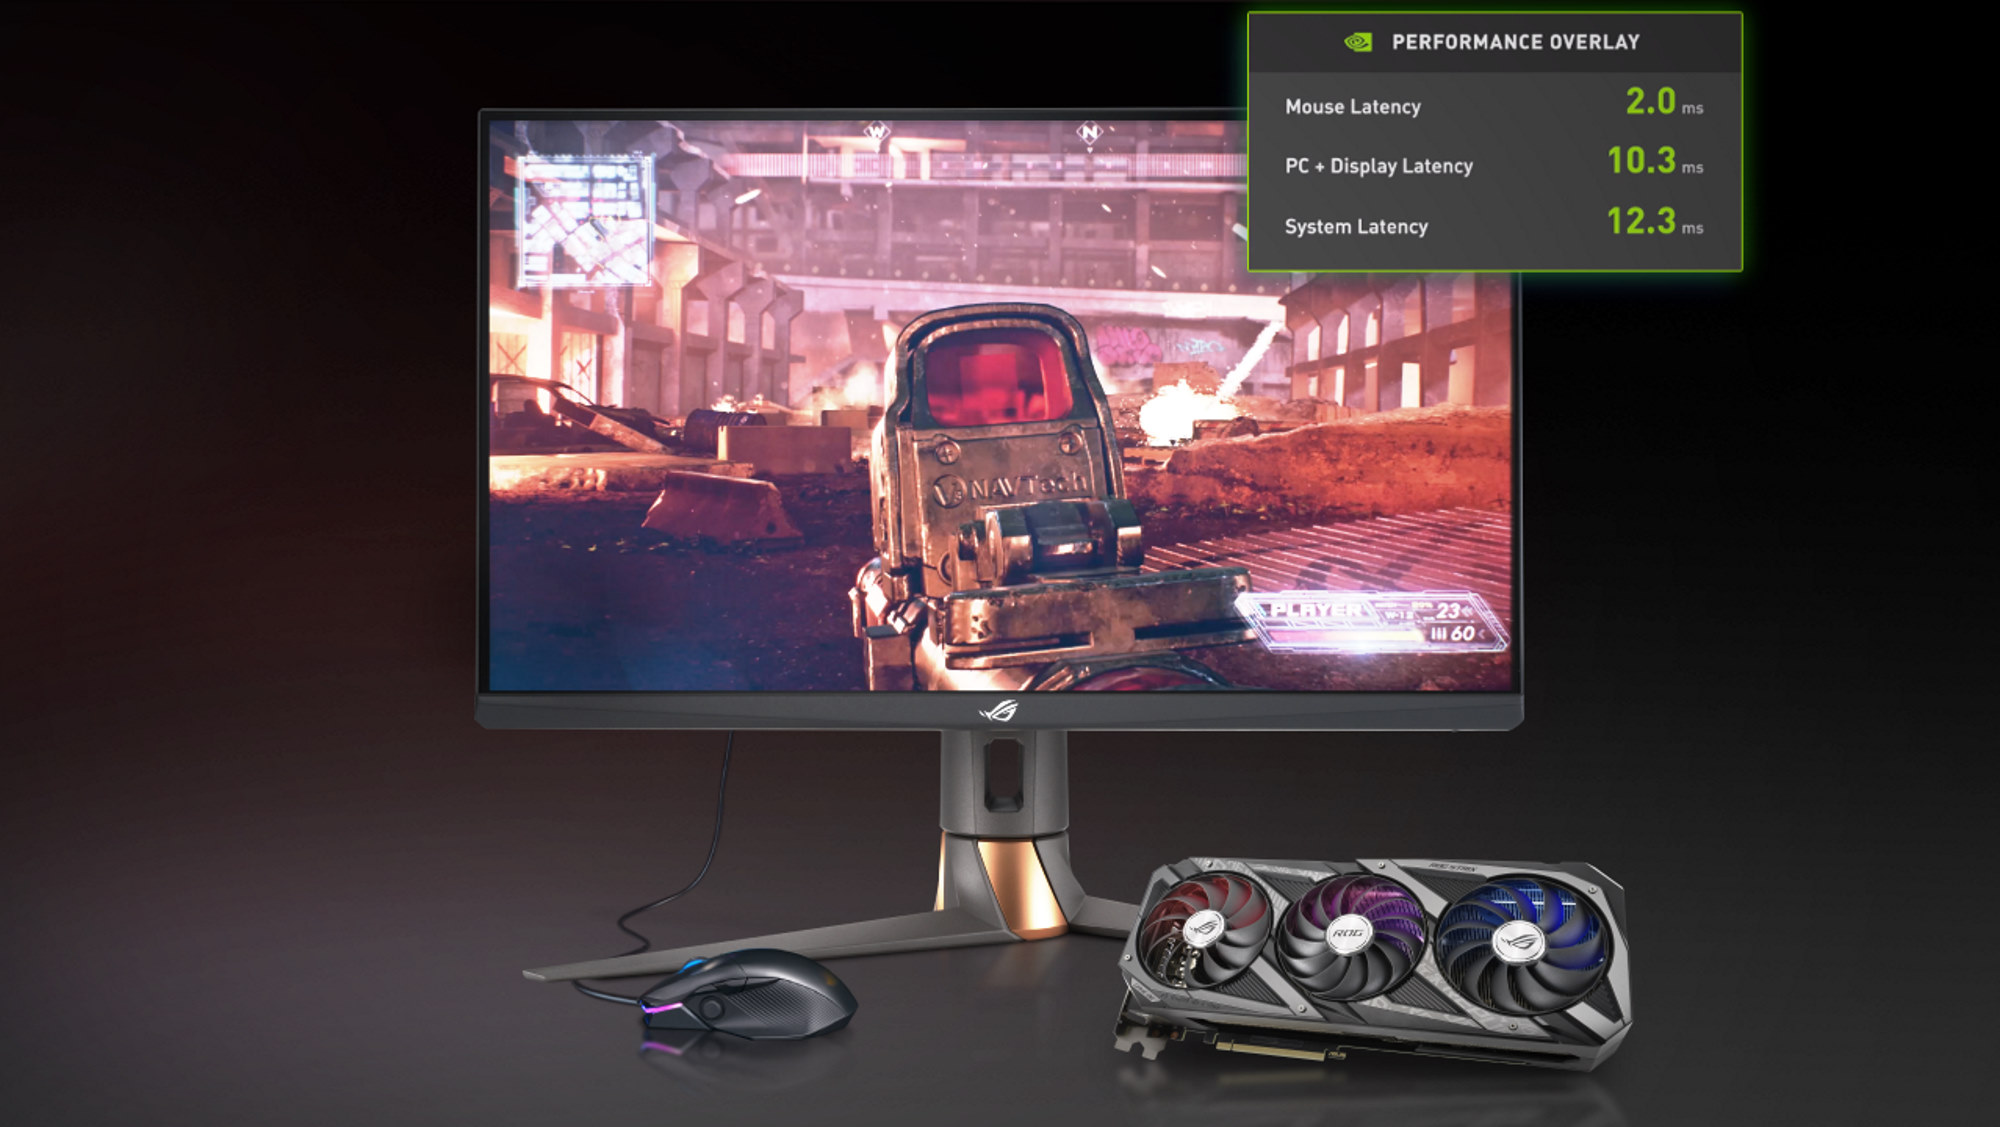 PG279QM with a performance overlay on screen, with a mouse and Strix GPU next to the monitor.